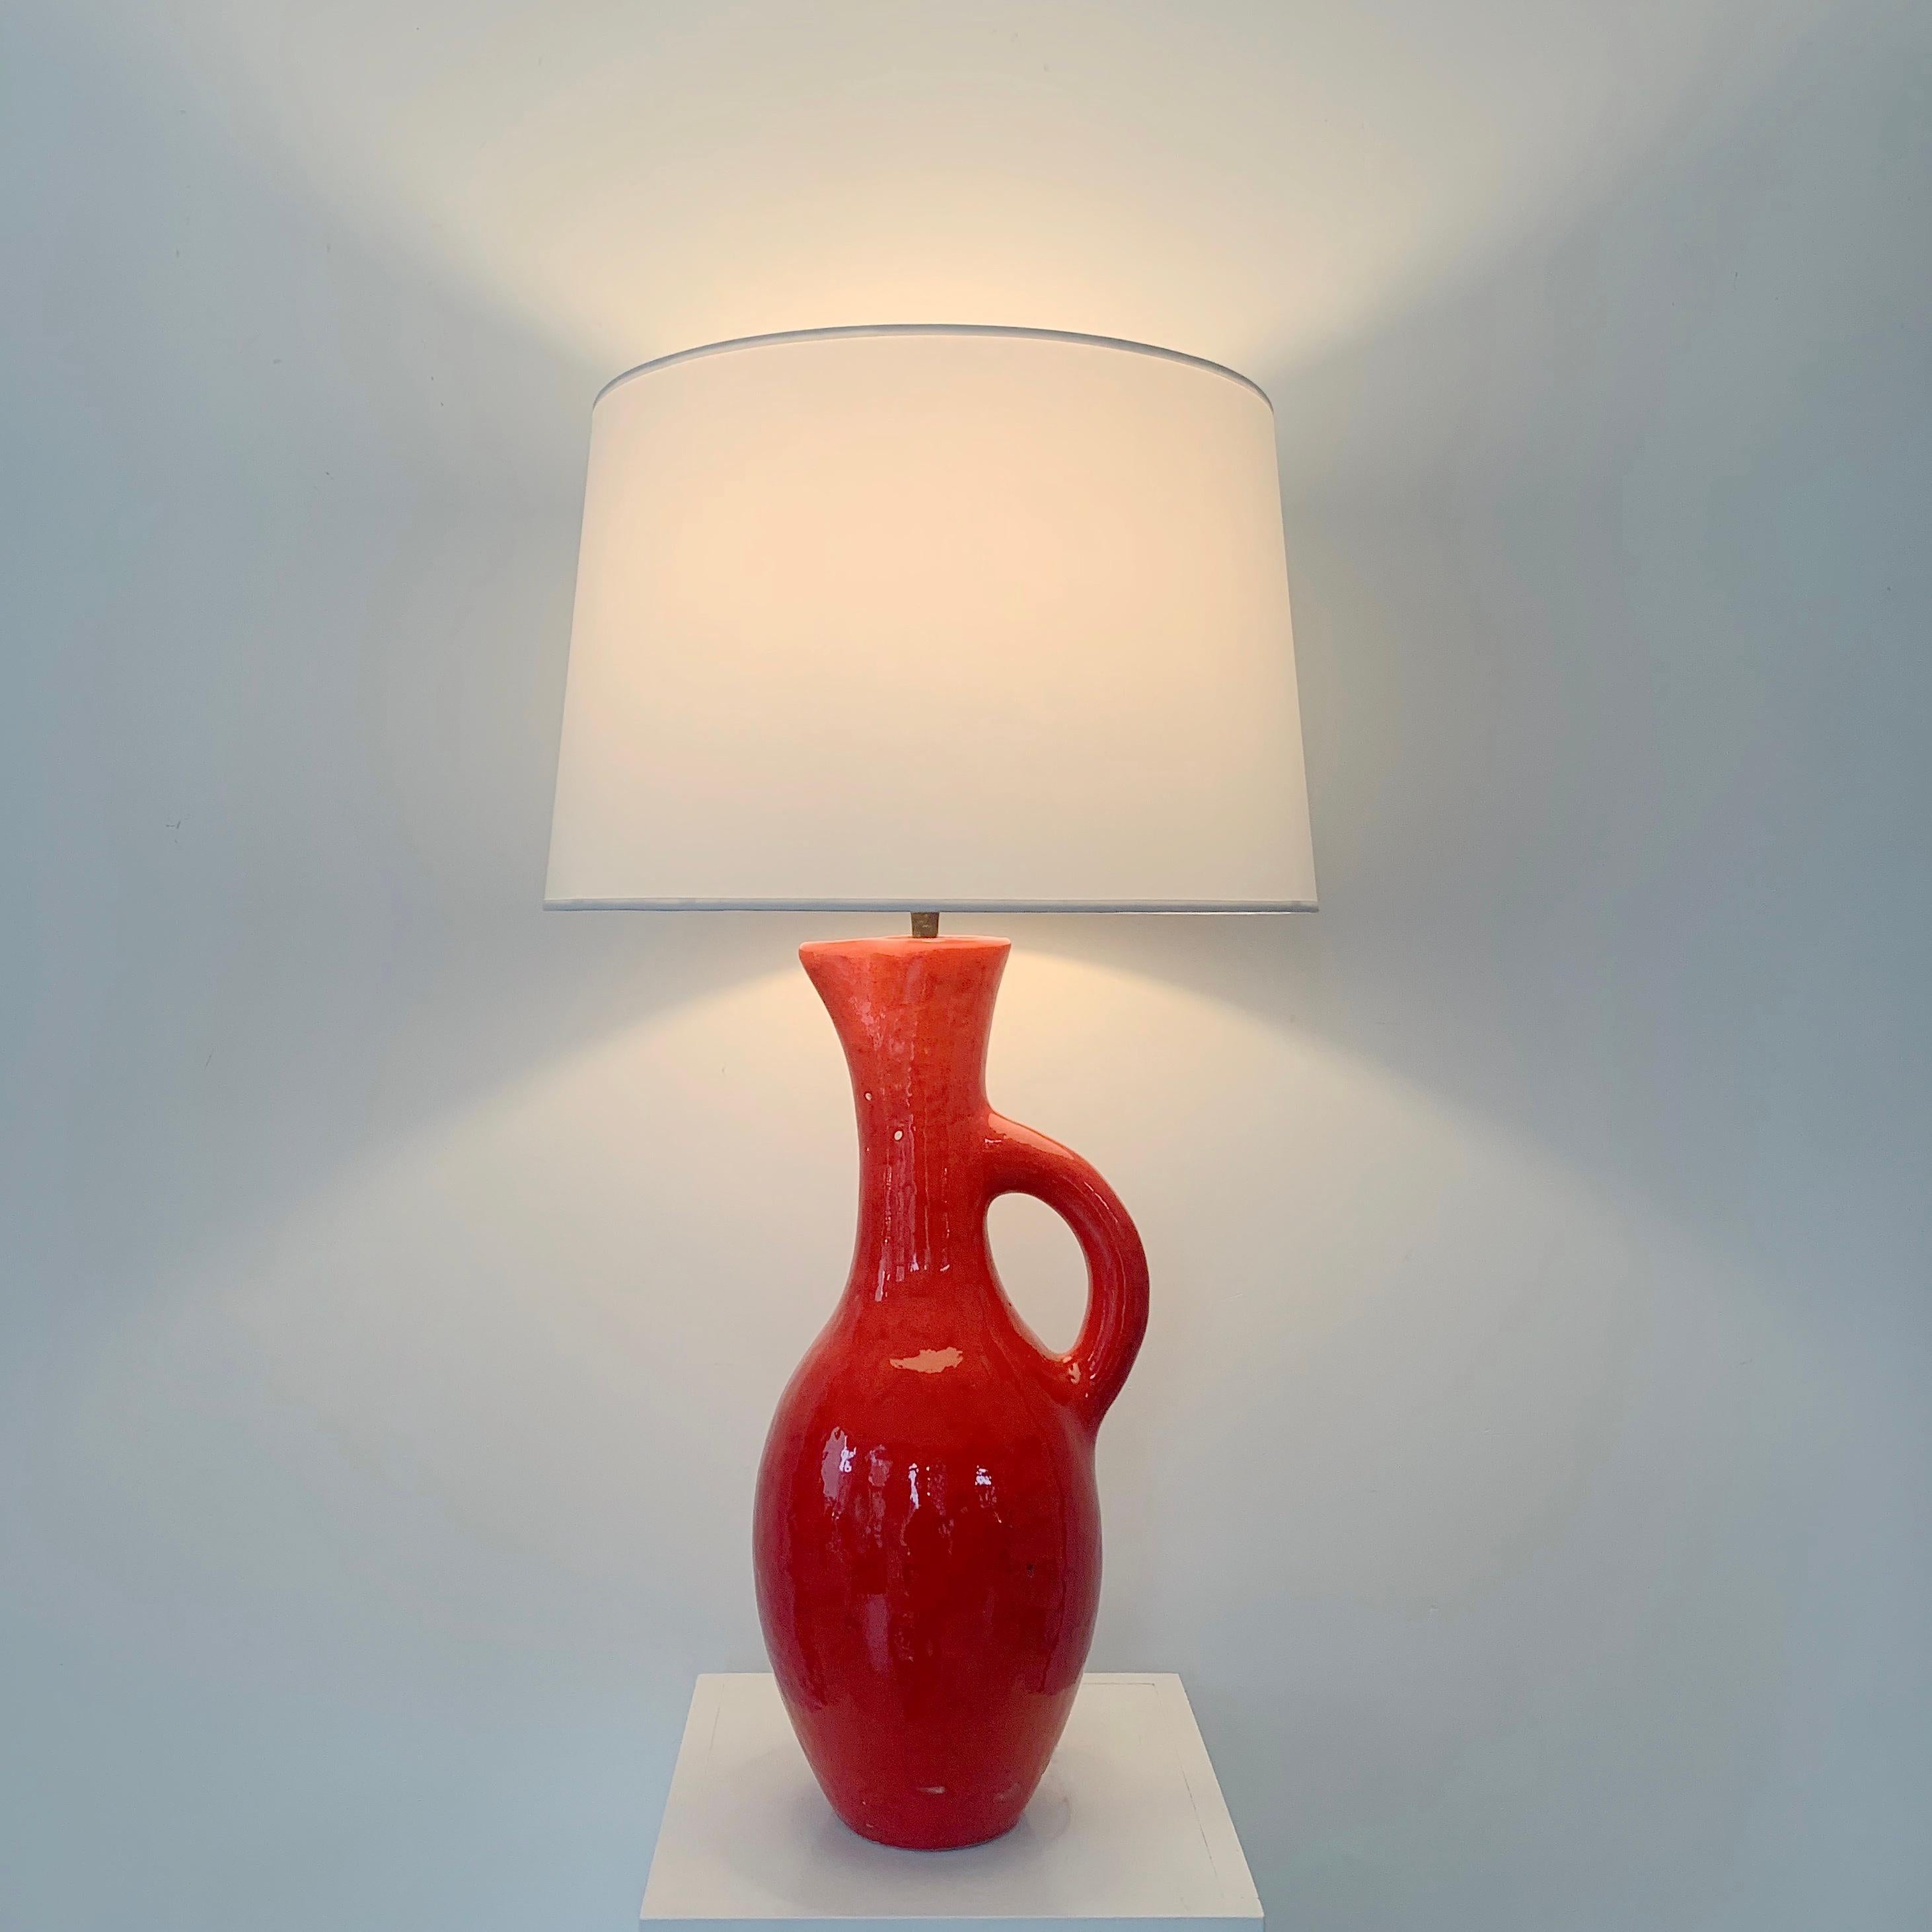 Earthenware Les Archanges/Gilbert Valentin Large Signed Table Lamp, 1950s, Vallauris.